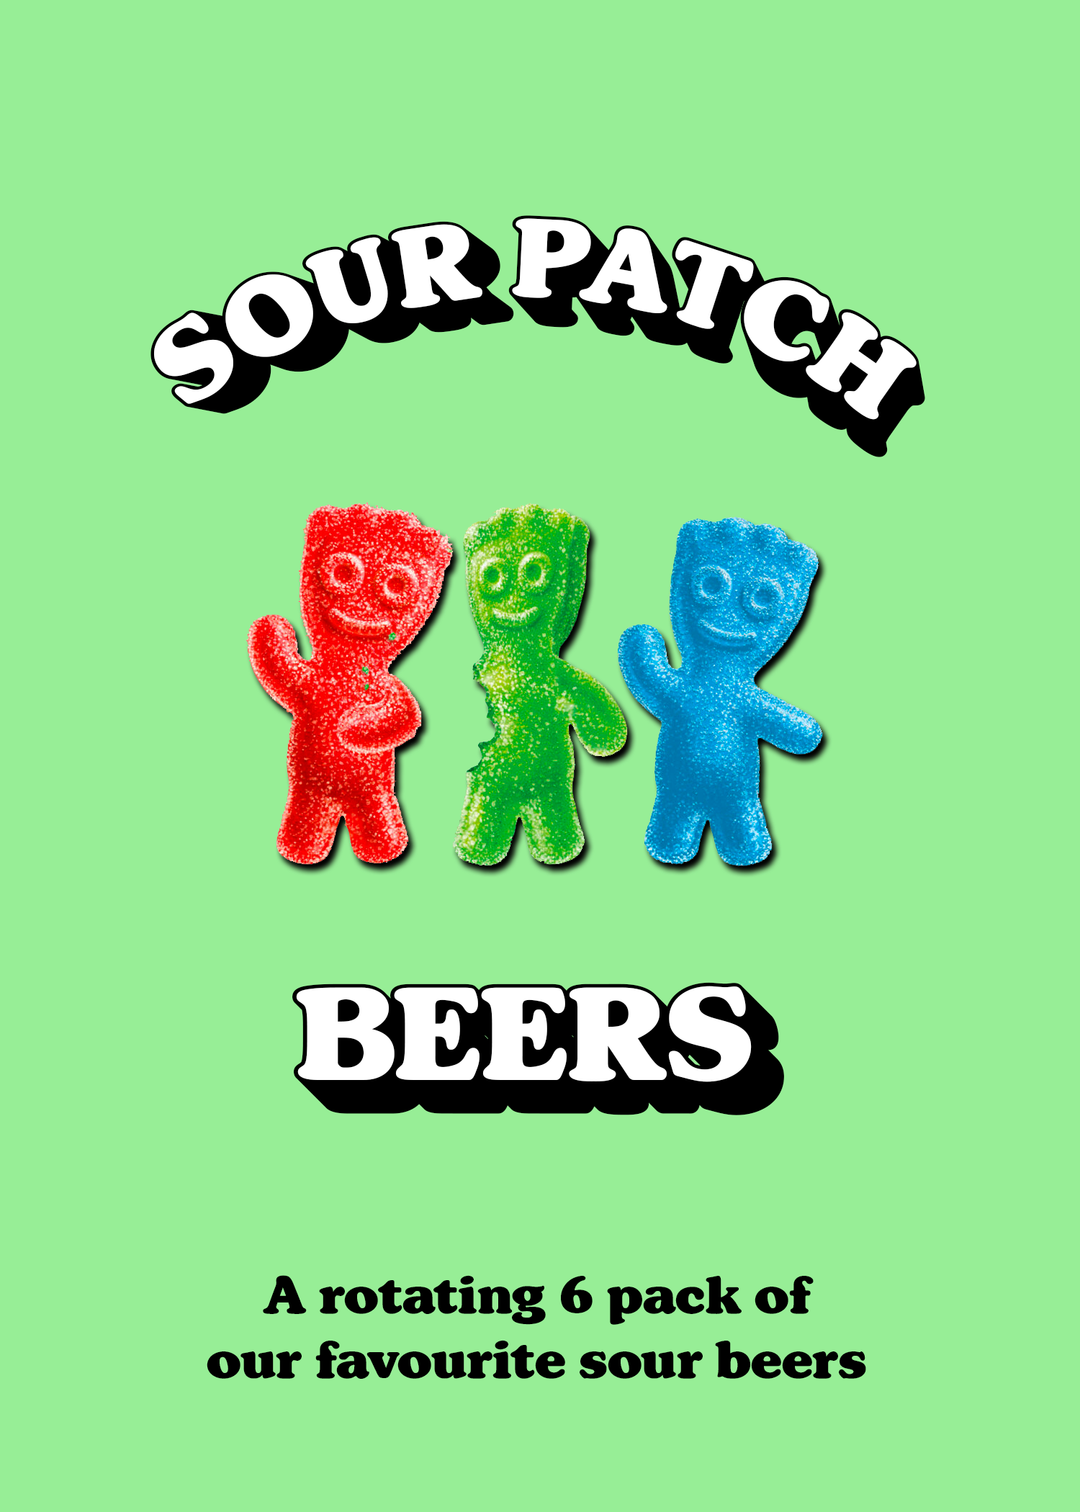 MIXED PACK - SOUR PATCH BEERS 12.0